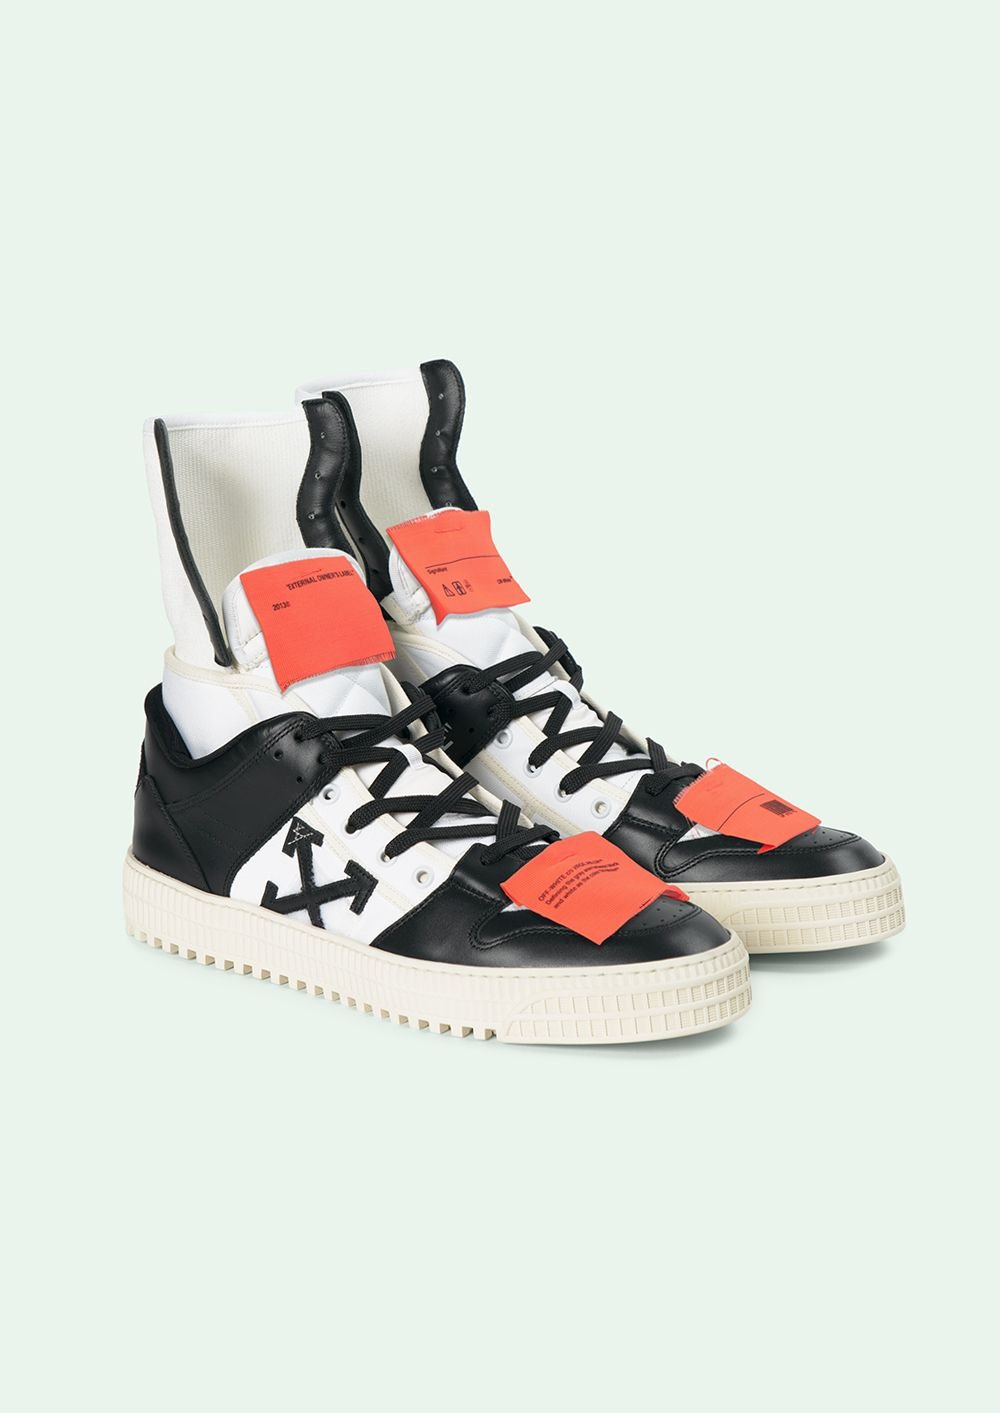 Off-White surpasses Gucci and Balenciaga to become the most attractive brand 1